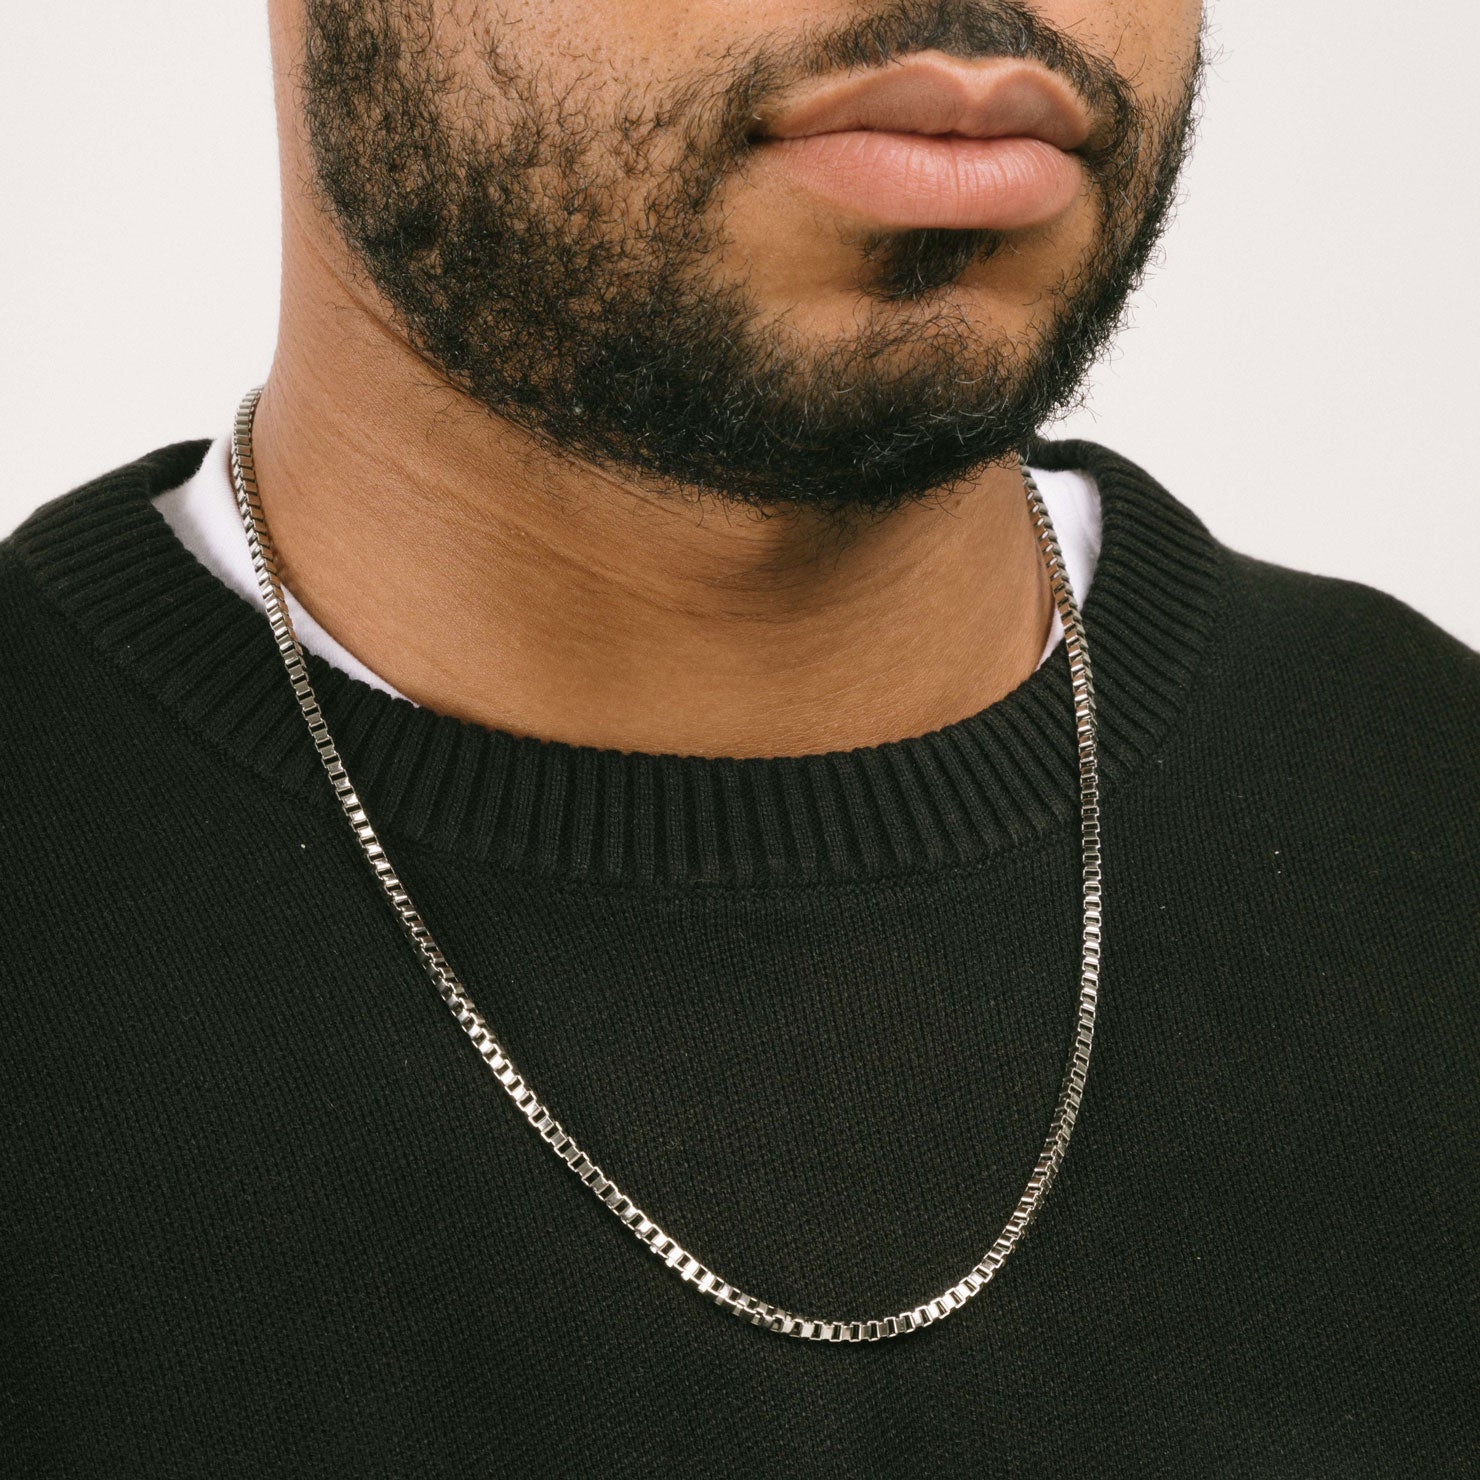 A model wearing the 3.5mm Square Box Chain crafted from high-grade Stainless Steel, measuring 22 inches / 56 cm in length and 2 mm in width. Weighing 5.8 grams, this chain is non-tarnishing and water-resistant.